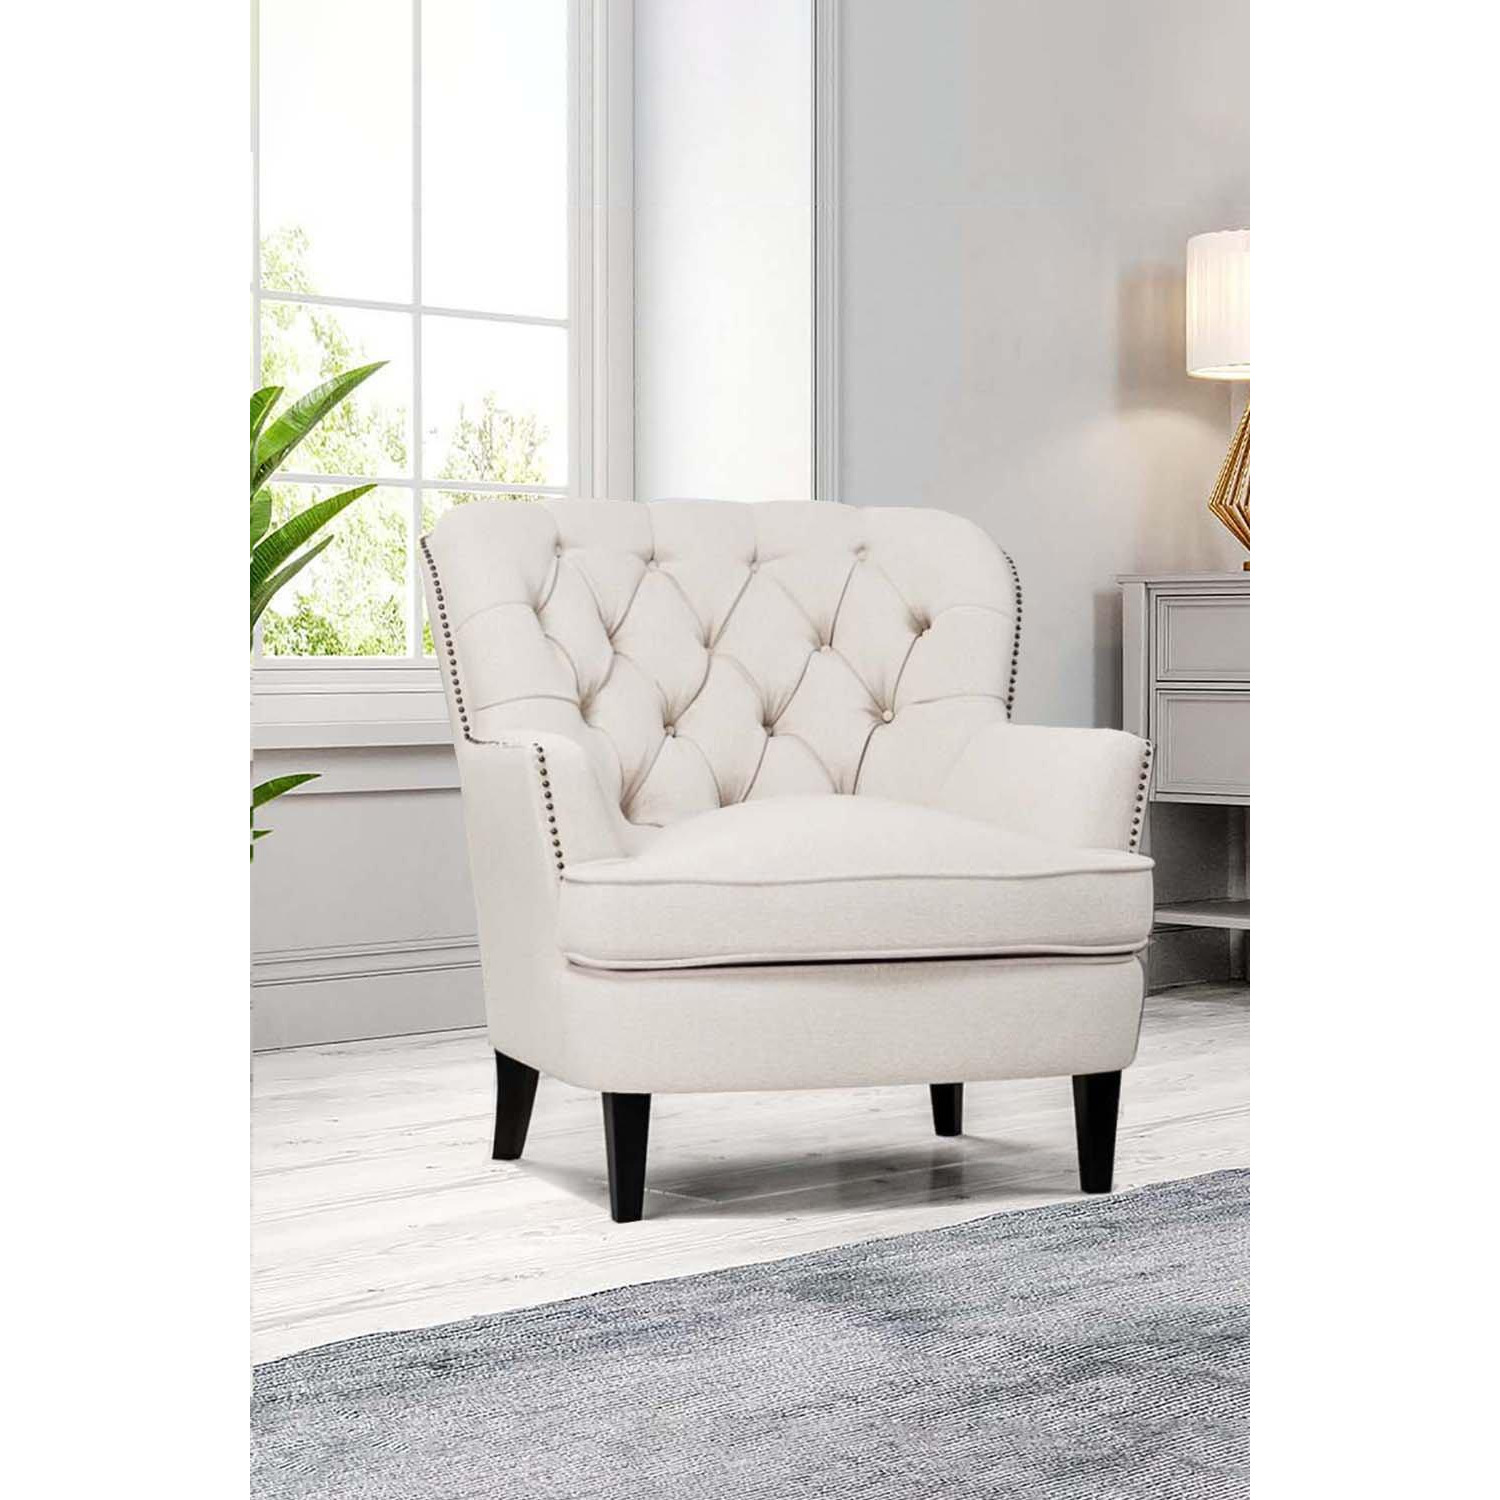 Linen Upholstered Armchair with Wooden Legs - image 1